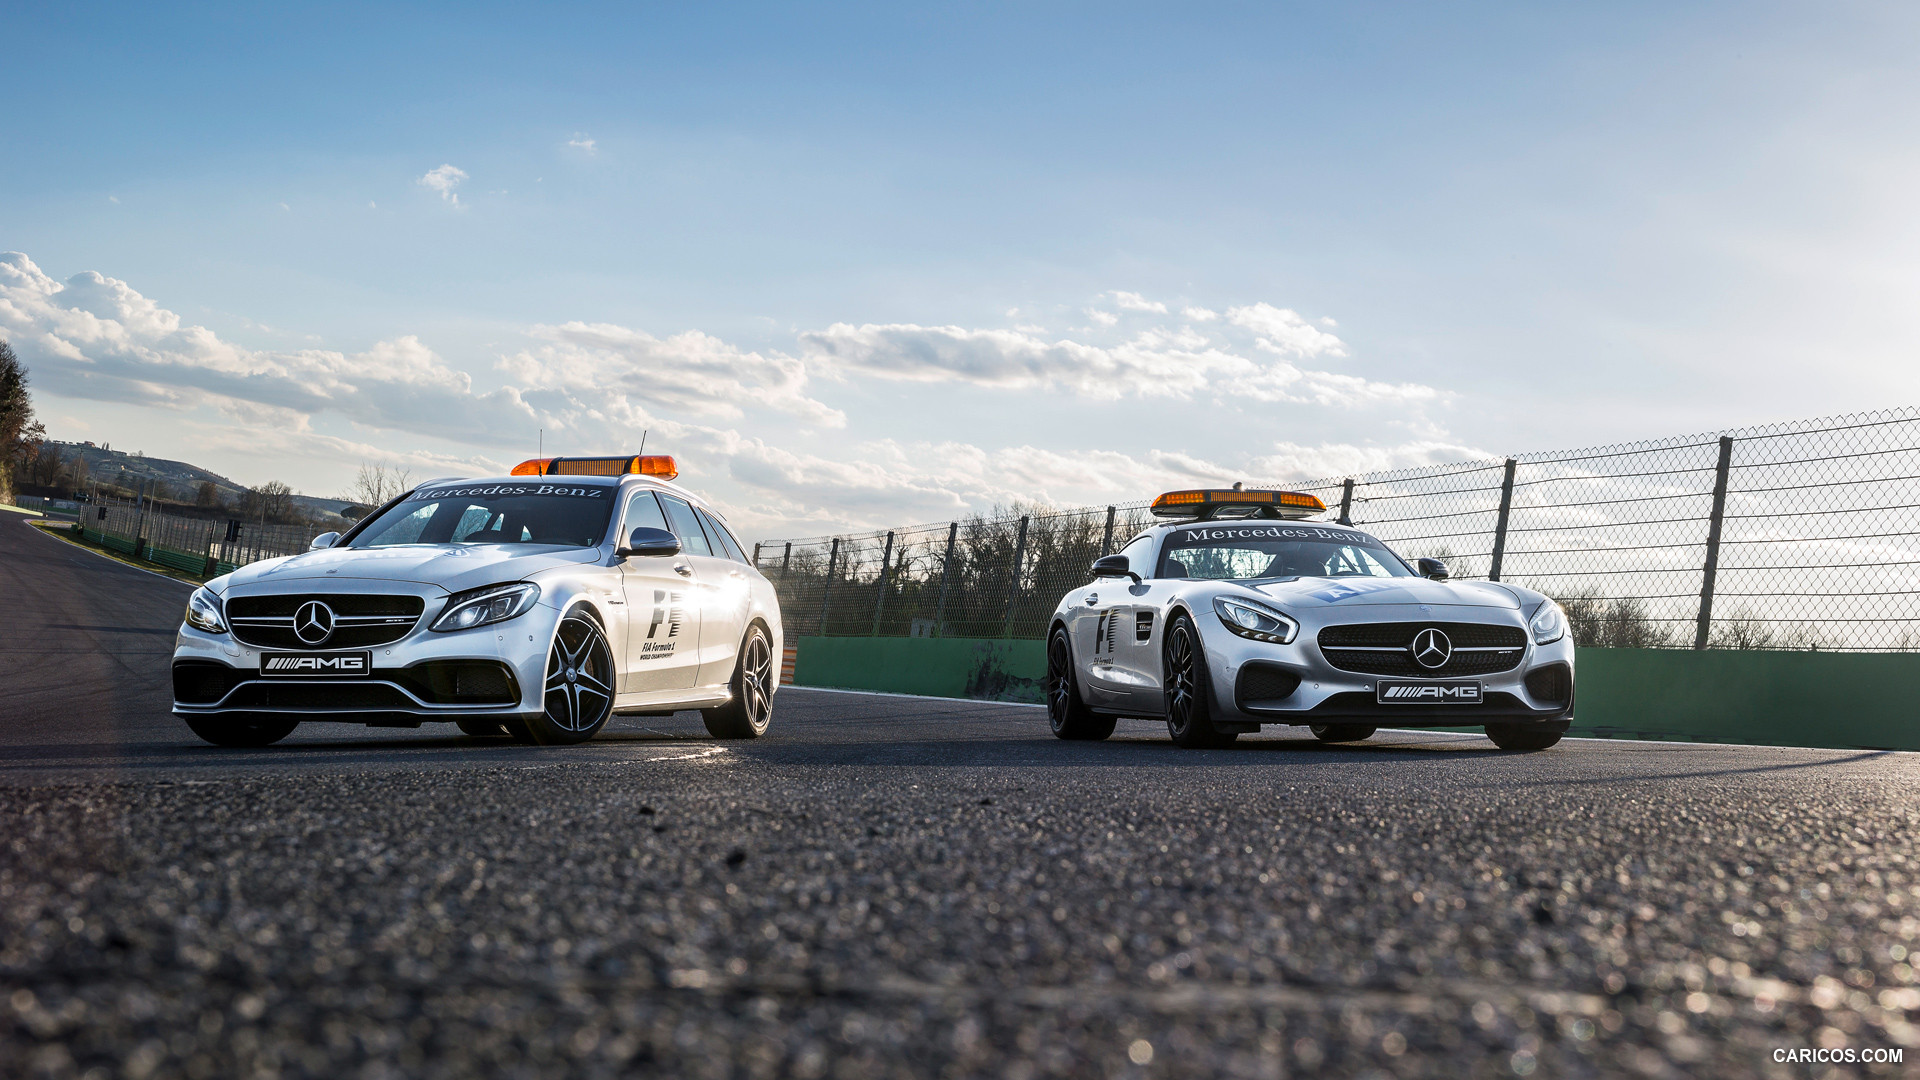 2015 Mercedes-AMG C63 S Estate F1 Medical Car and GT S Safety Car - Front, #8 of 8